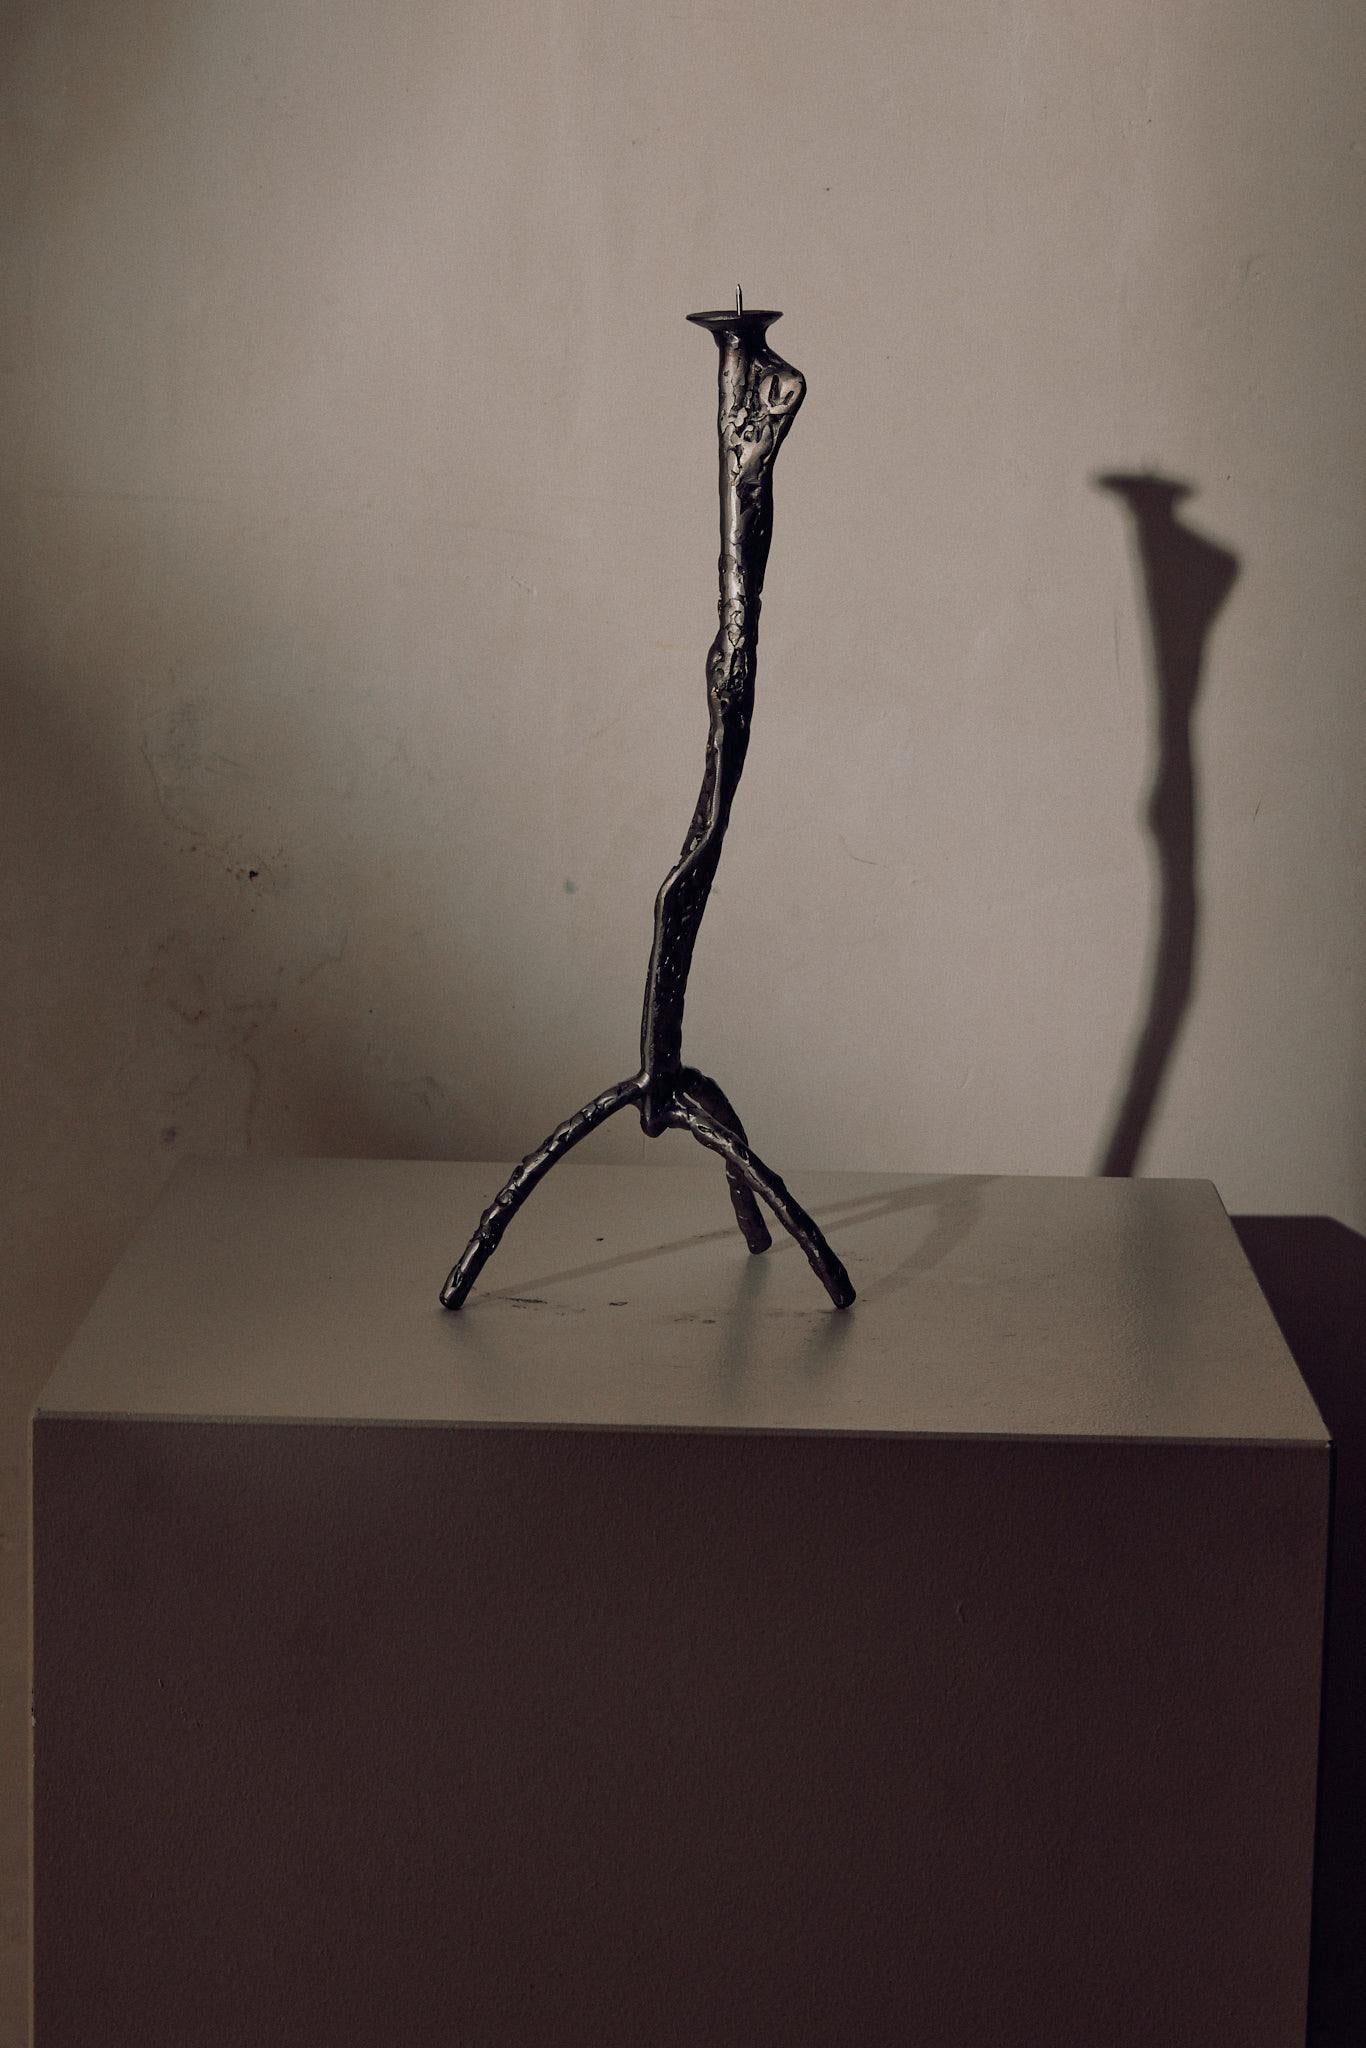 Large candle stick by Michael Gittings
Dimensions: D 35 x W 35 x H 35 cm.
Materials: Stainless steel.

Michael Gittings
Michael Gittings imagines with his hands. Since establishing his studio in 2016, the Melbourne based designer and sculptor